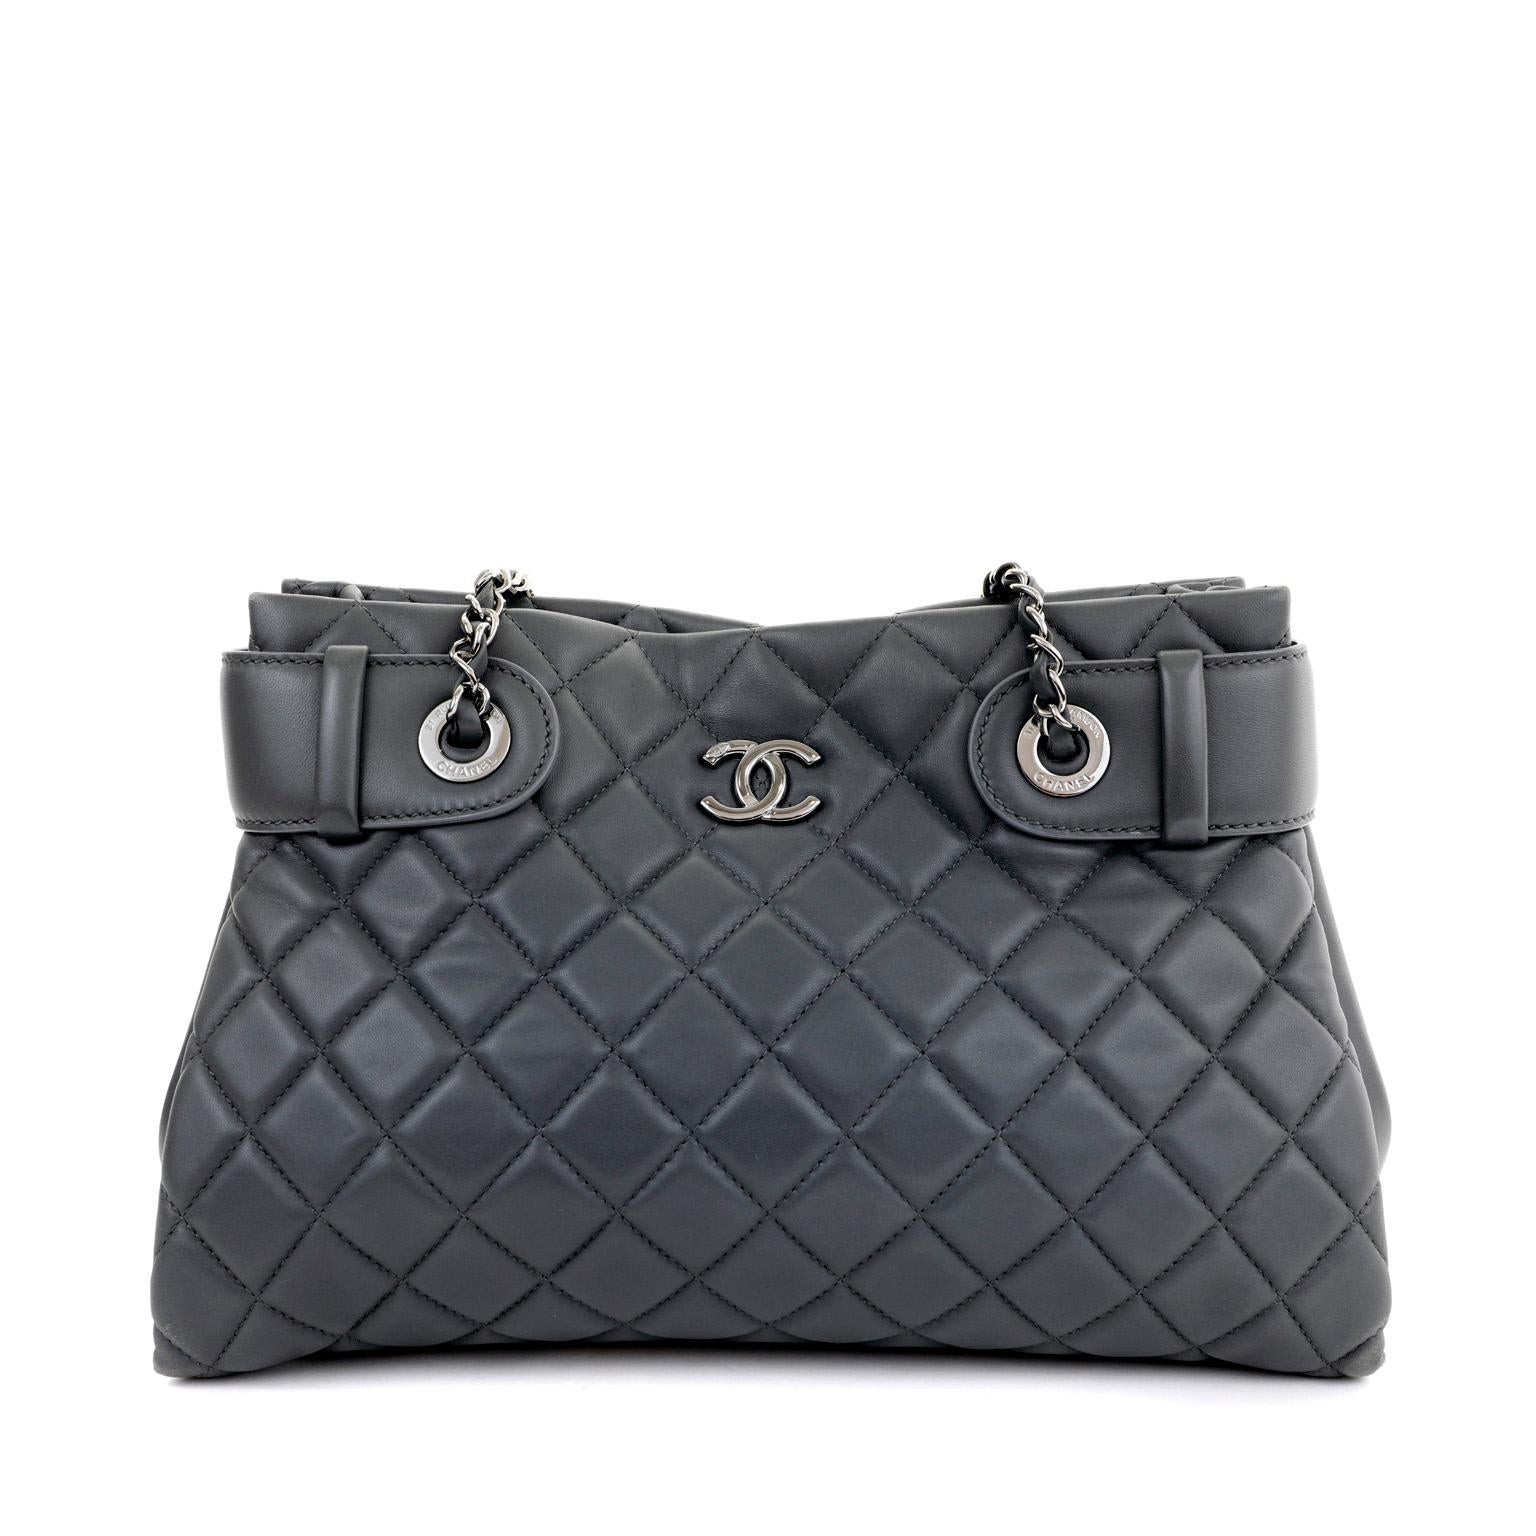 This authentic Chanel Graphite Lambskin Small Tote is in pristine unworn condition.  Perfect for every day, the simple silhouette carries all the essentials with an understated stylish flair.

Neutral dark graphite lambskin is quilted in signature